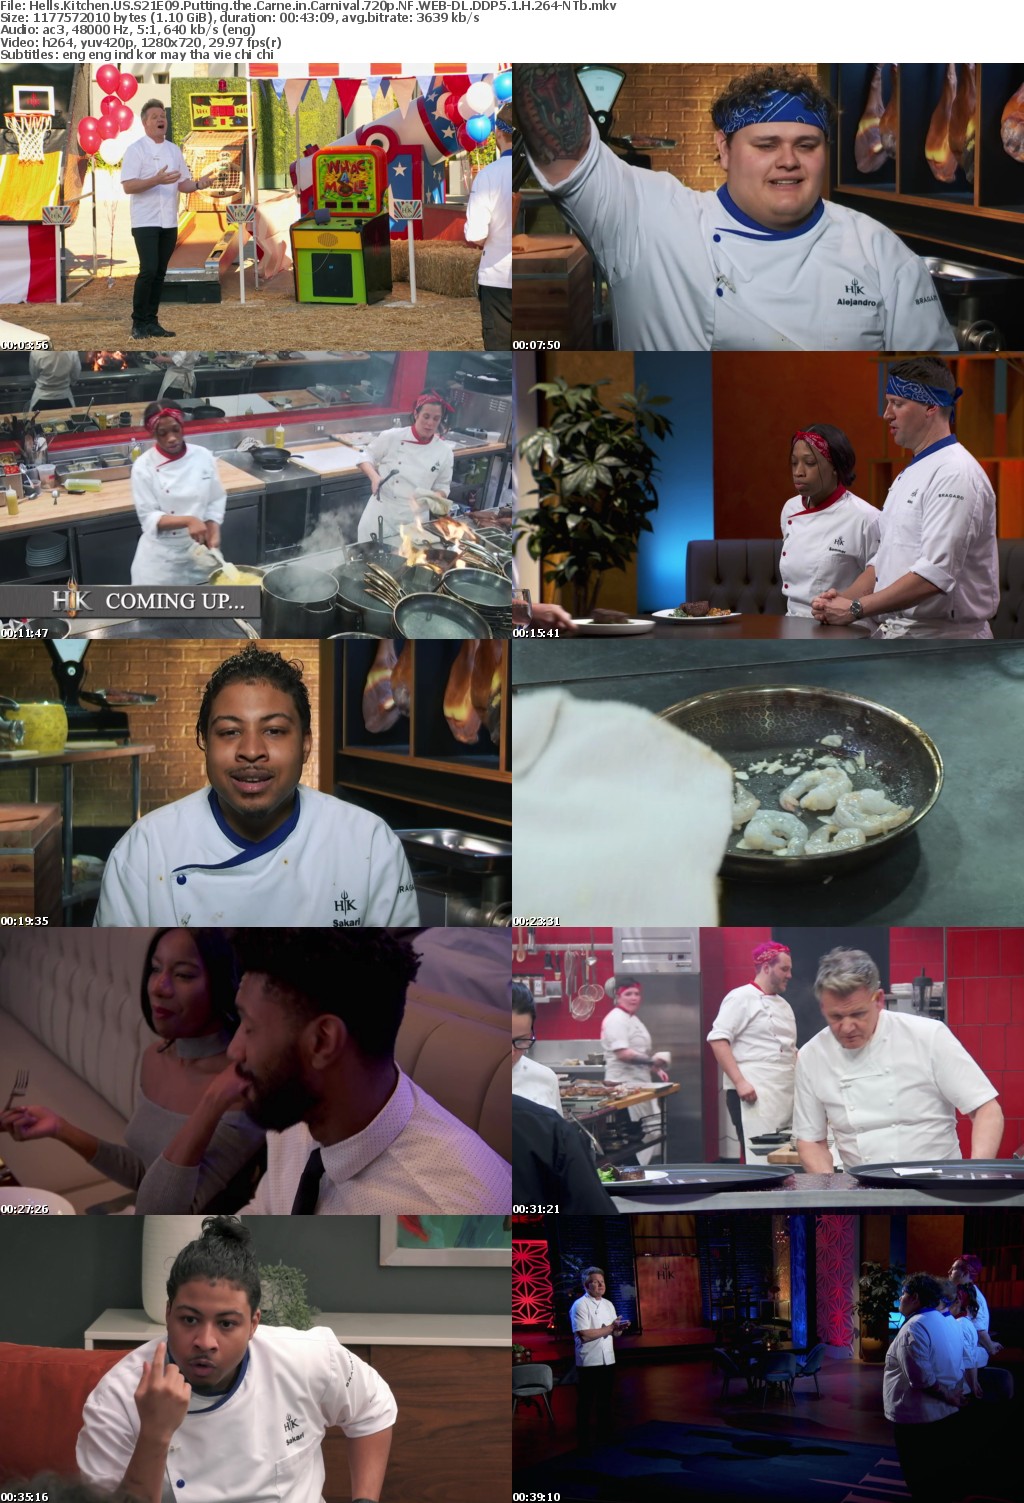 Hells Kitchen US S21E09 Putting the Carne in Carnival 720p NF WEBRip DDP5 1 x264-NTb